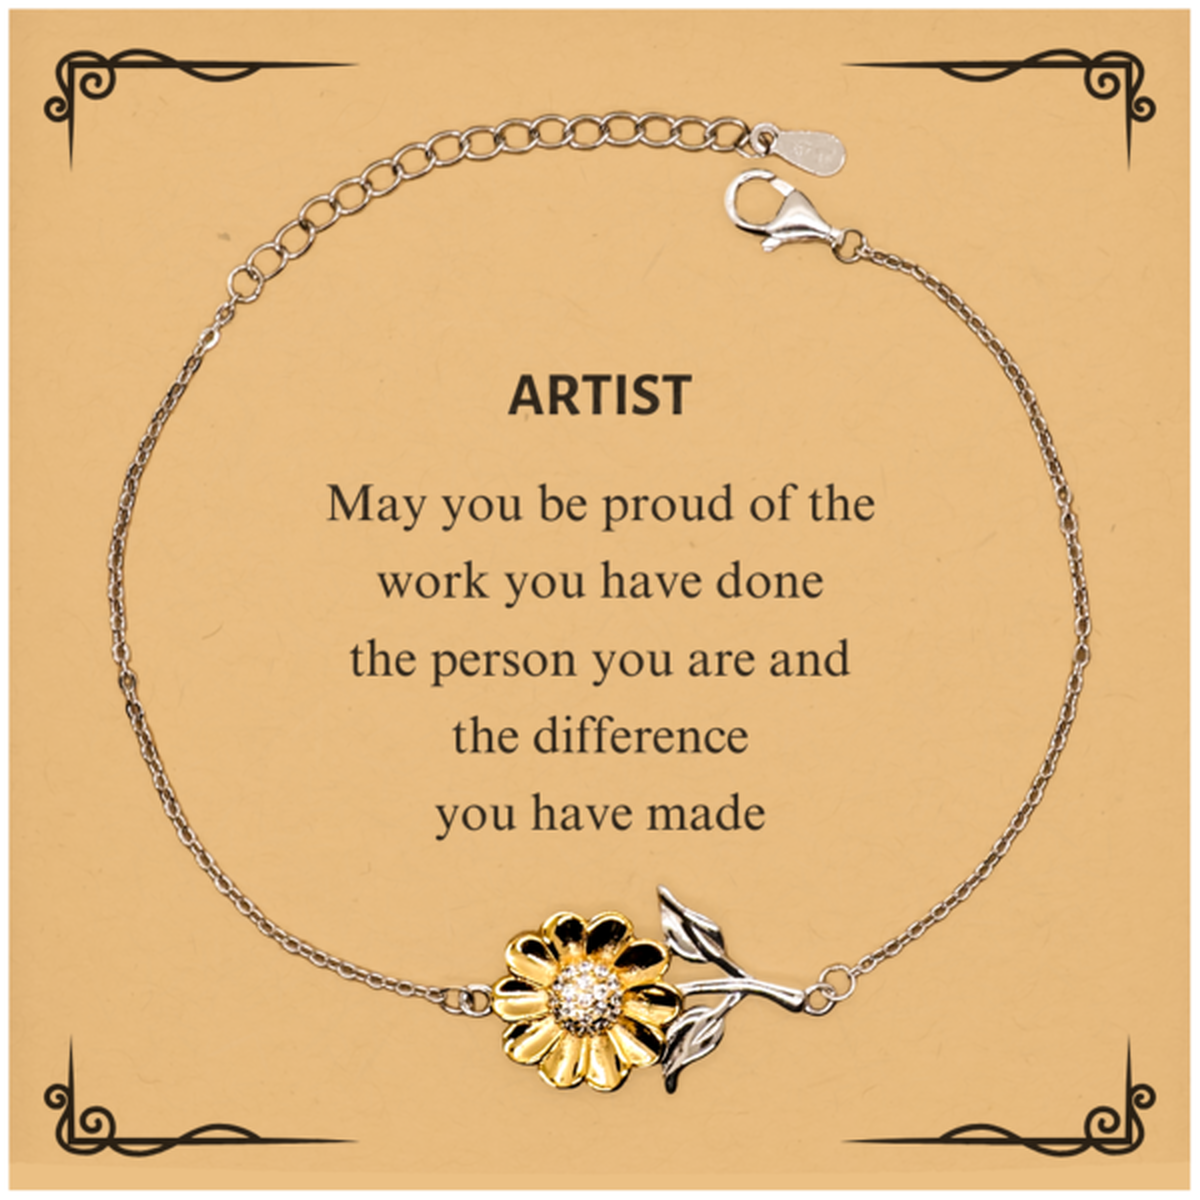 Artist May you be proud of the work you have done, Retirement Artist Sunflower Bracelet for Colleague Appreciation Gifts Amazing for Artist